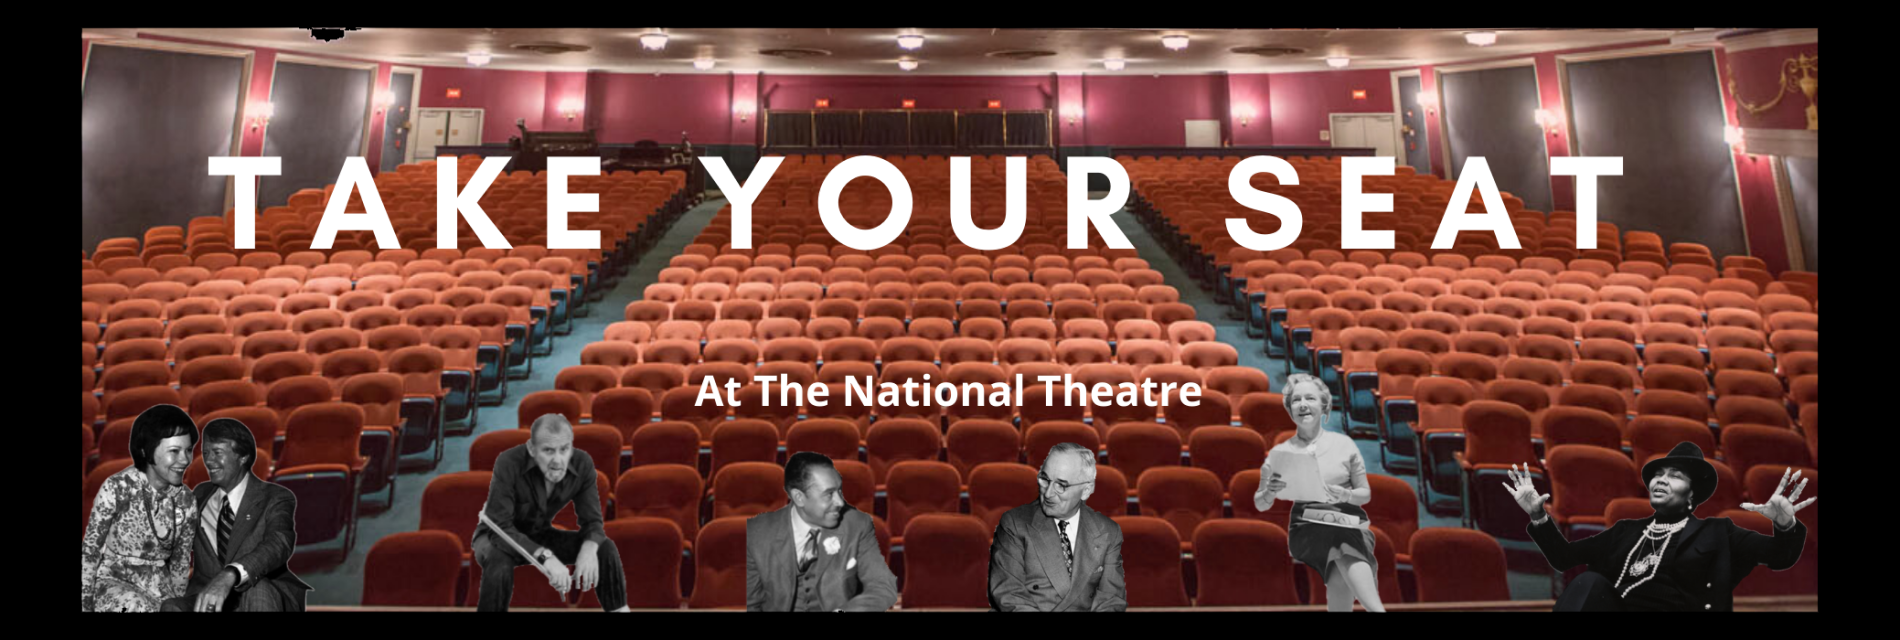 Slide 2: Dedicate a Seat at The National Theatre